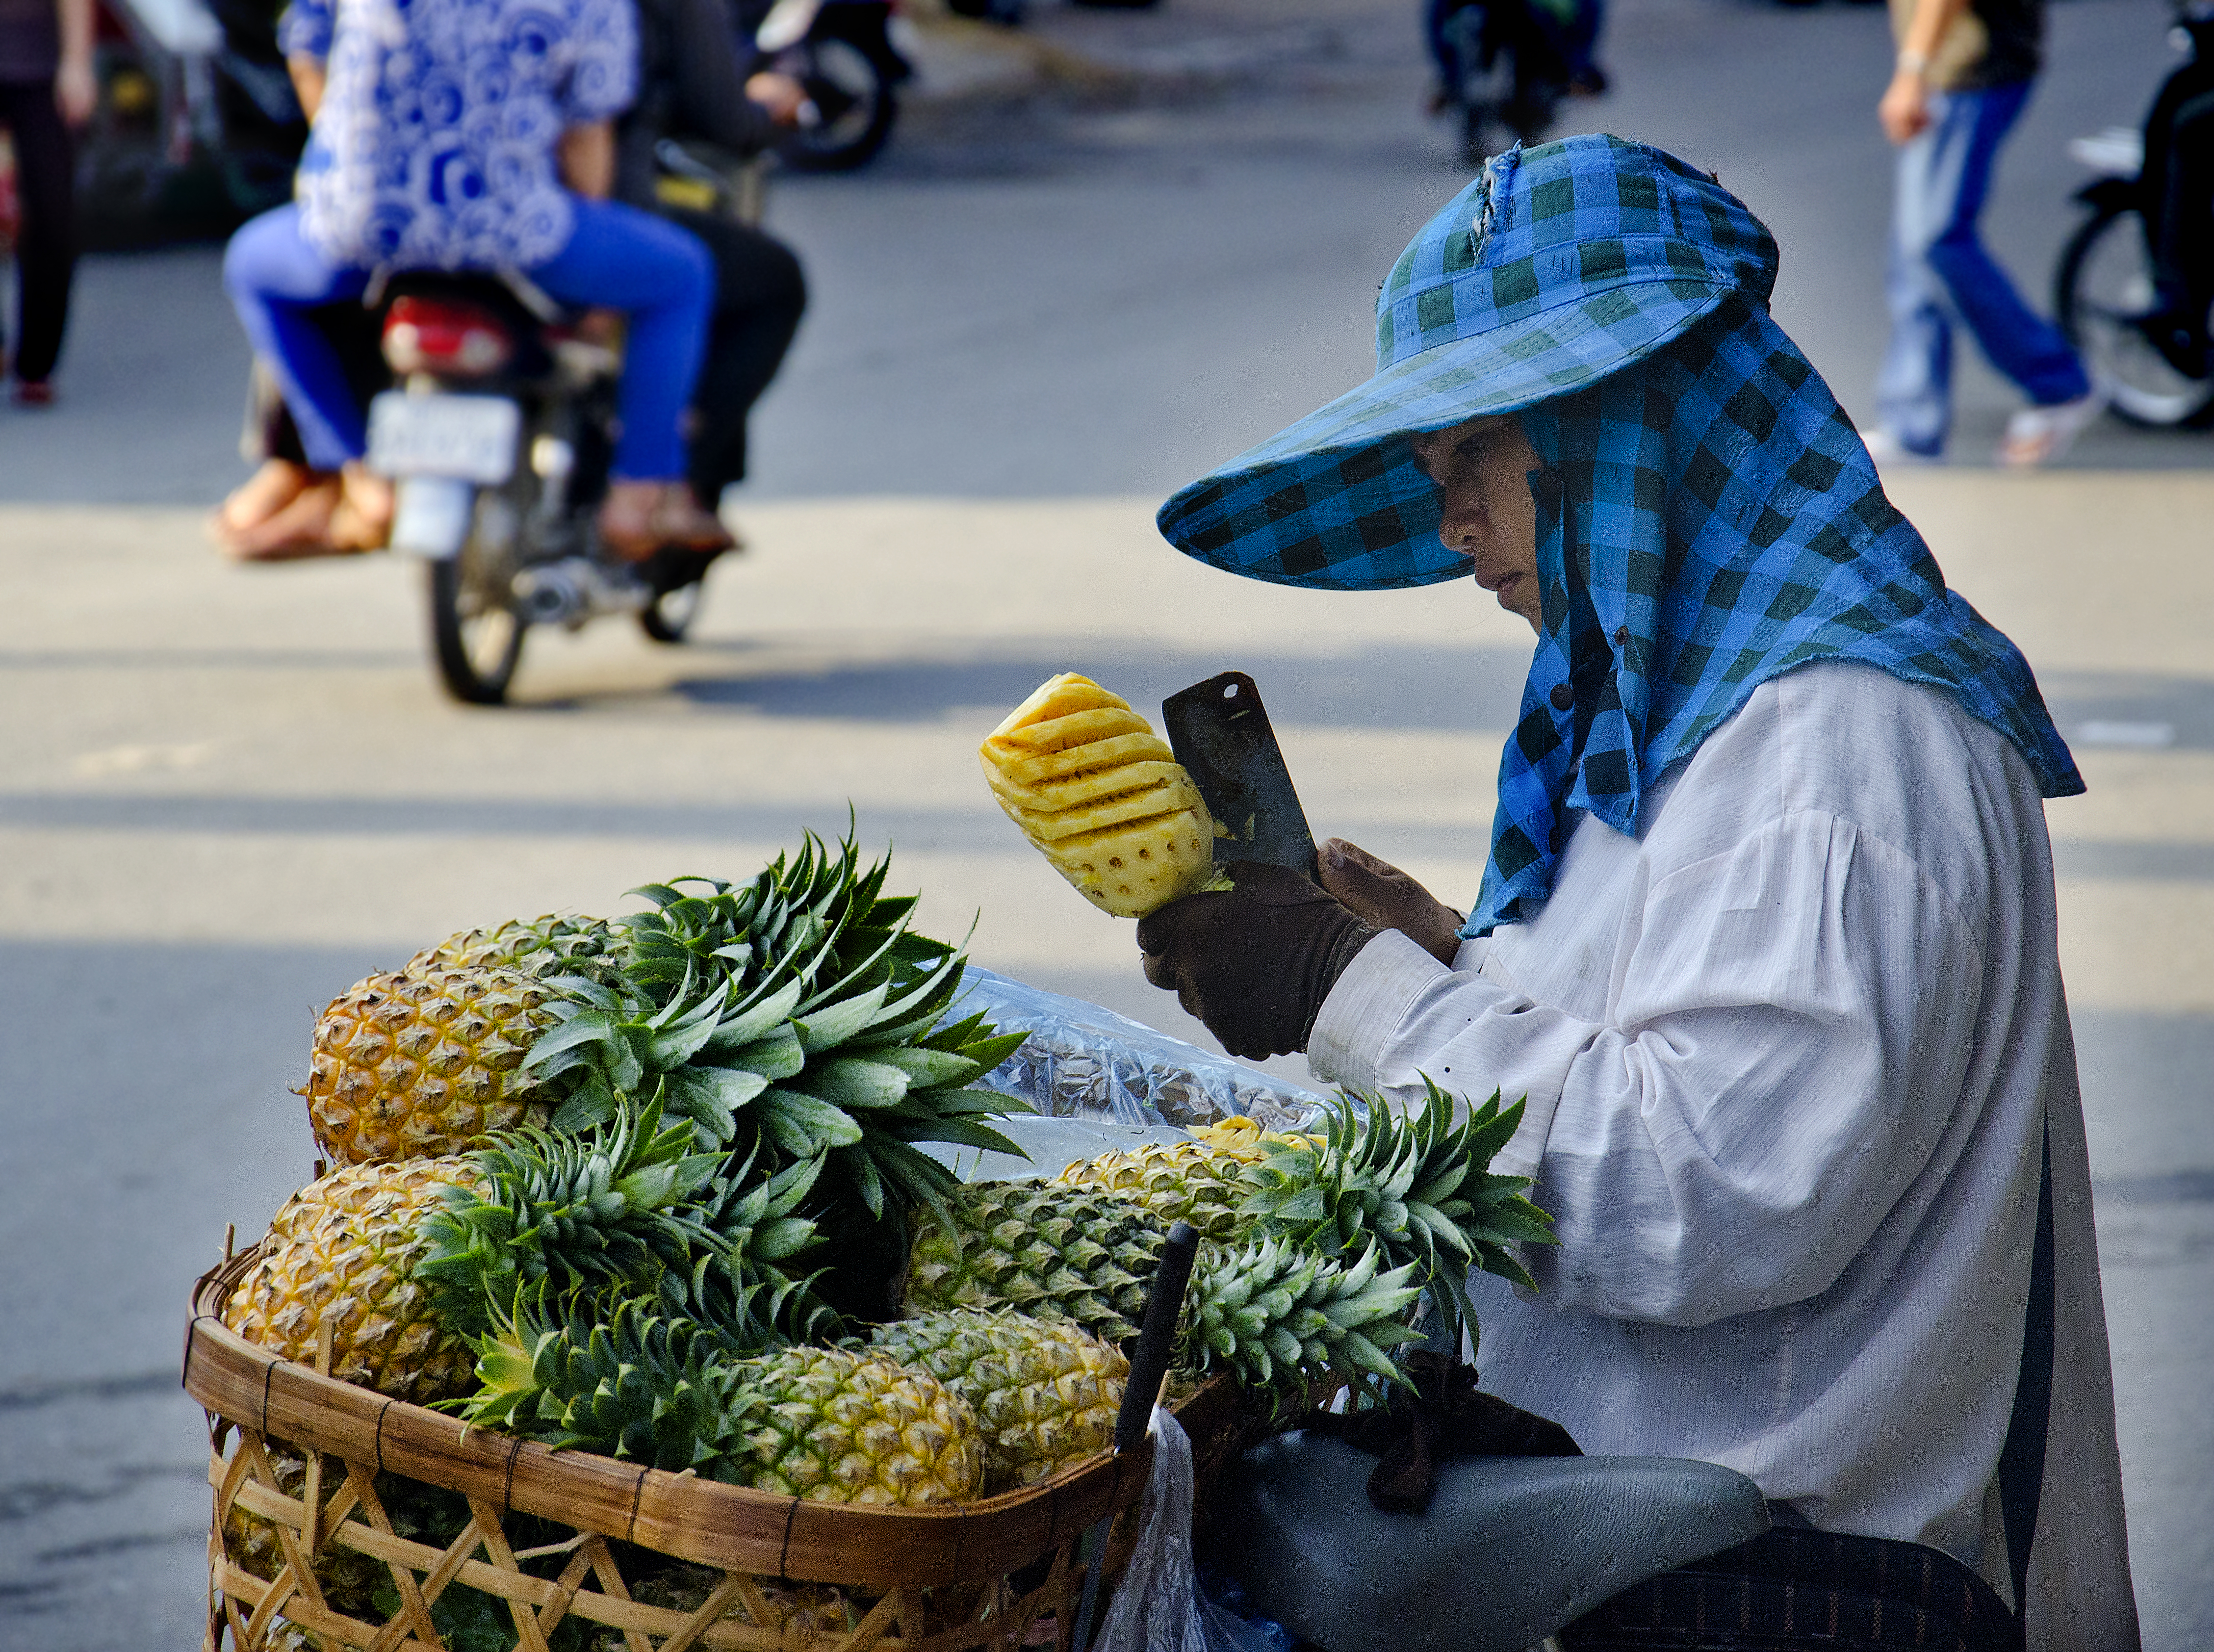 Carving a pineapple, Cambodia style